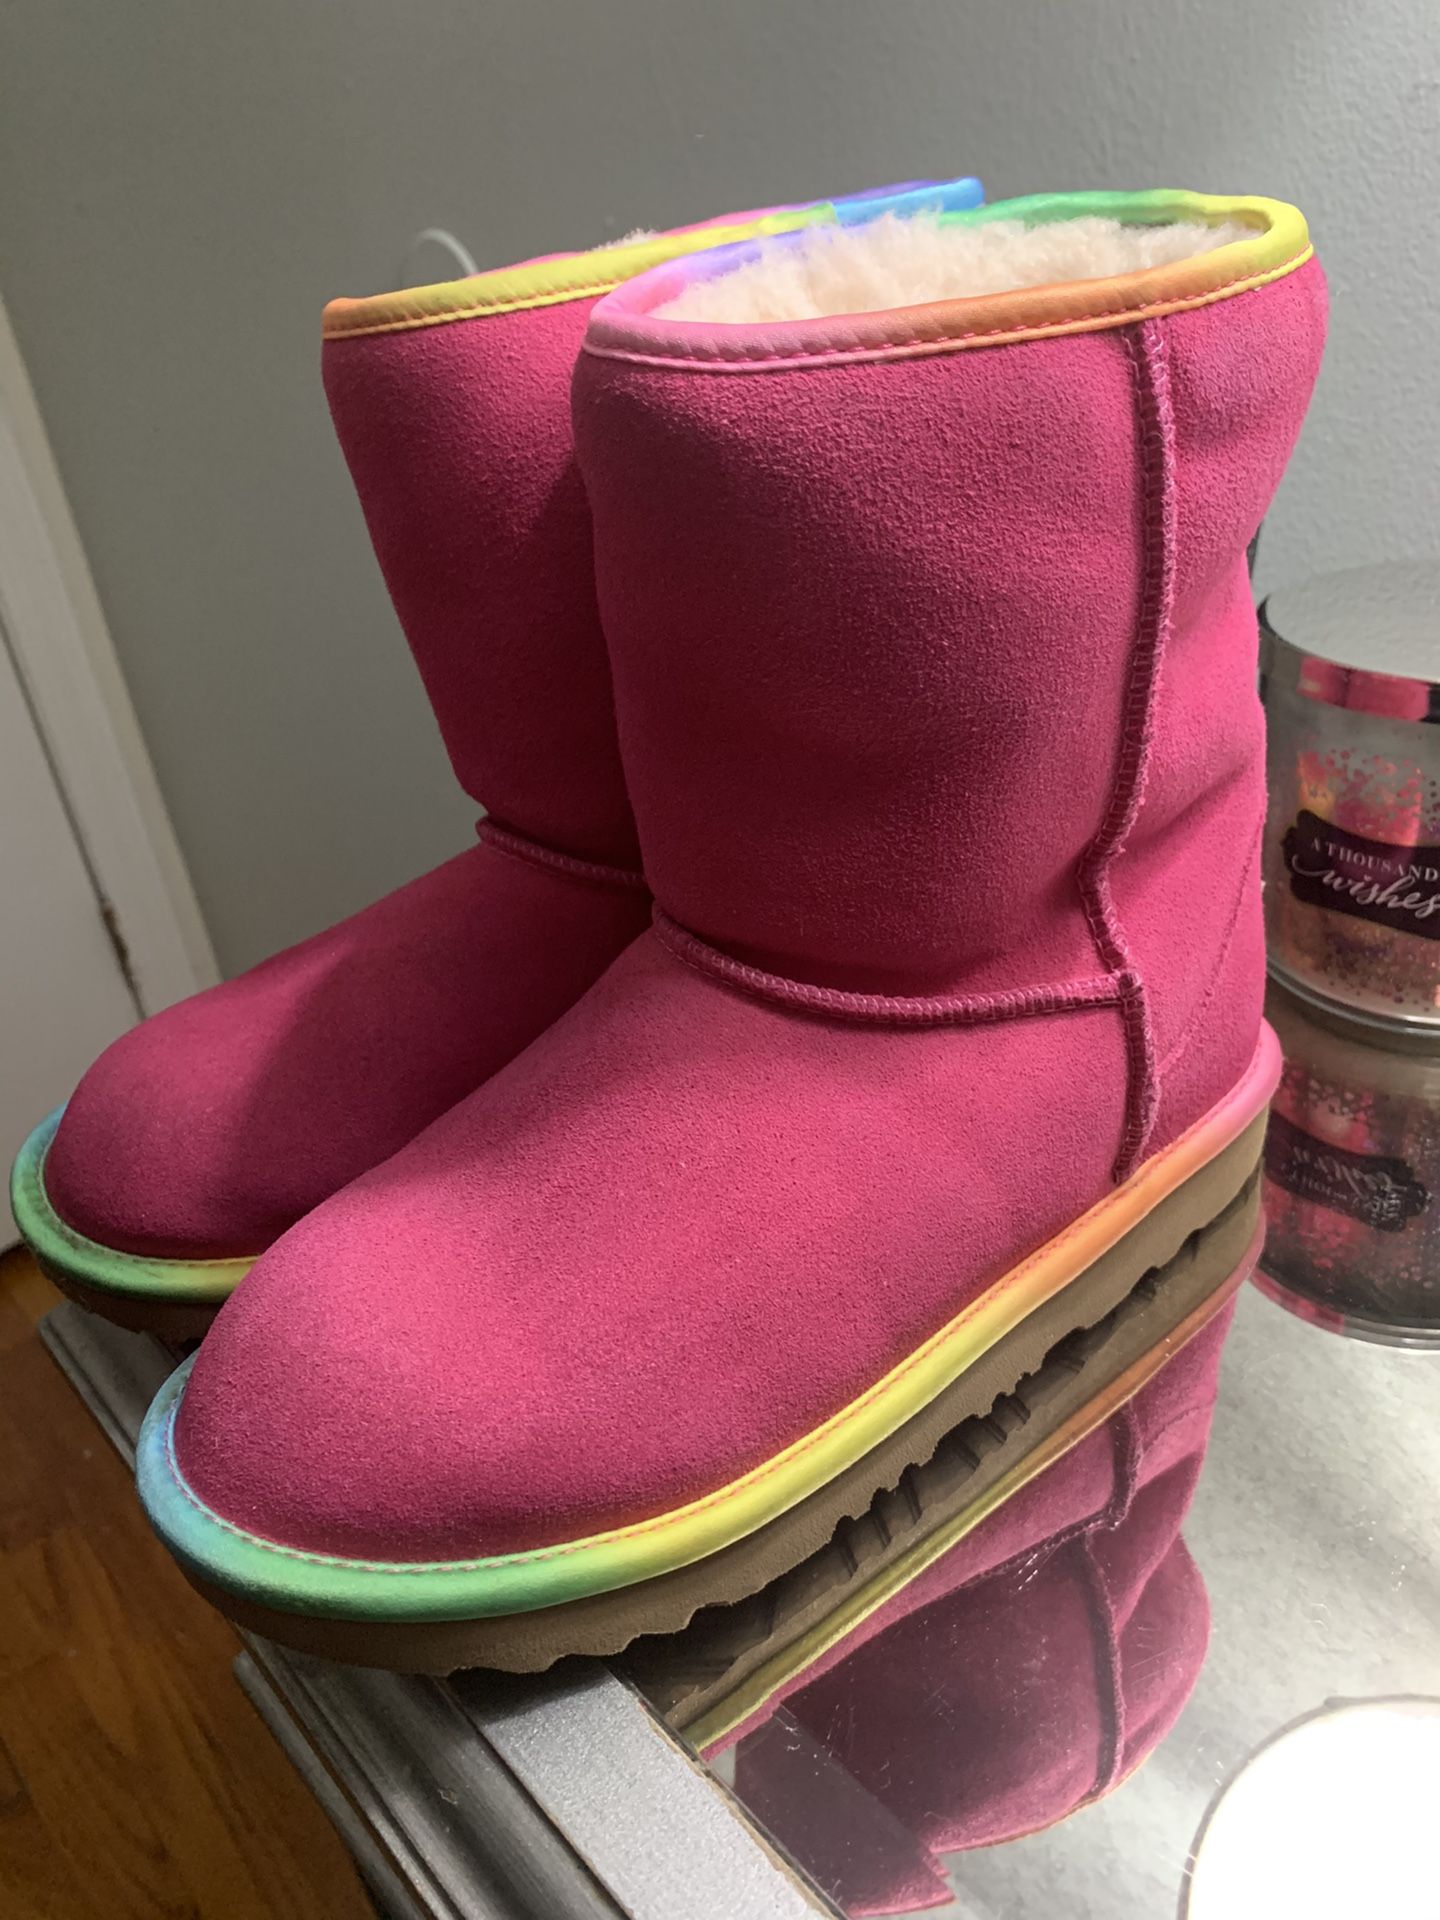 Ugg Boots Girls size 4